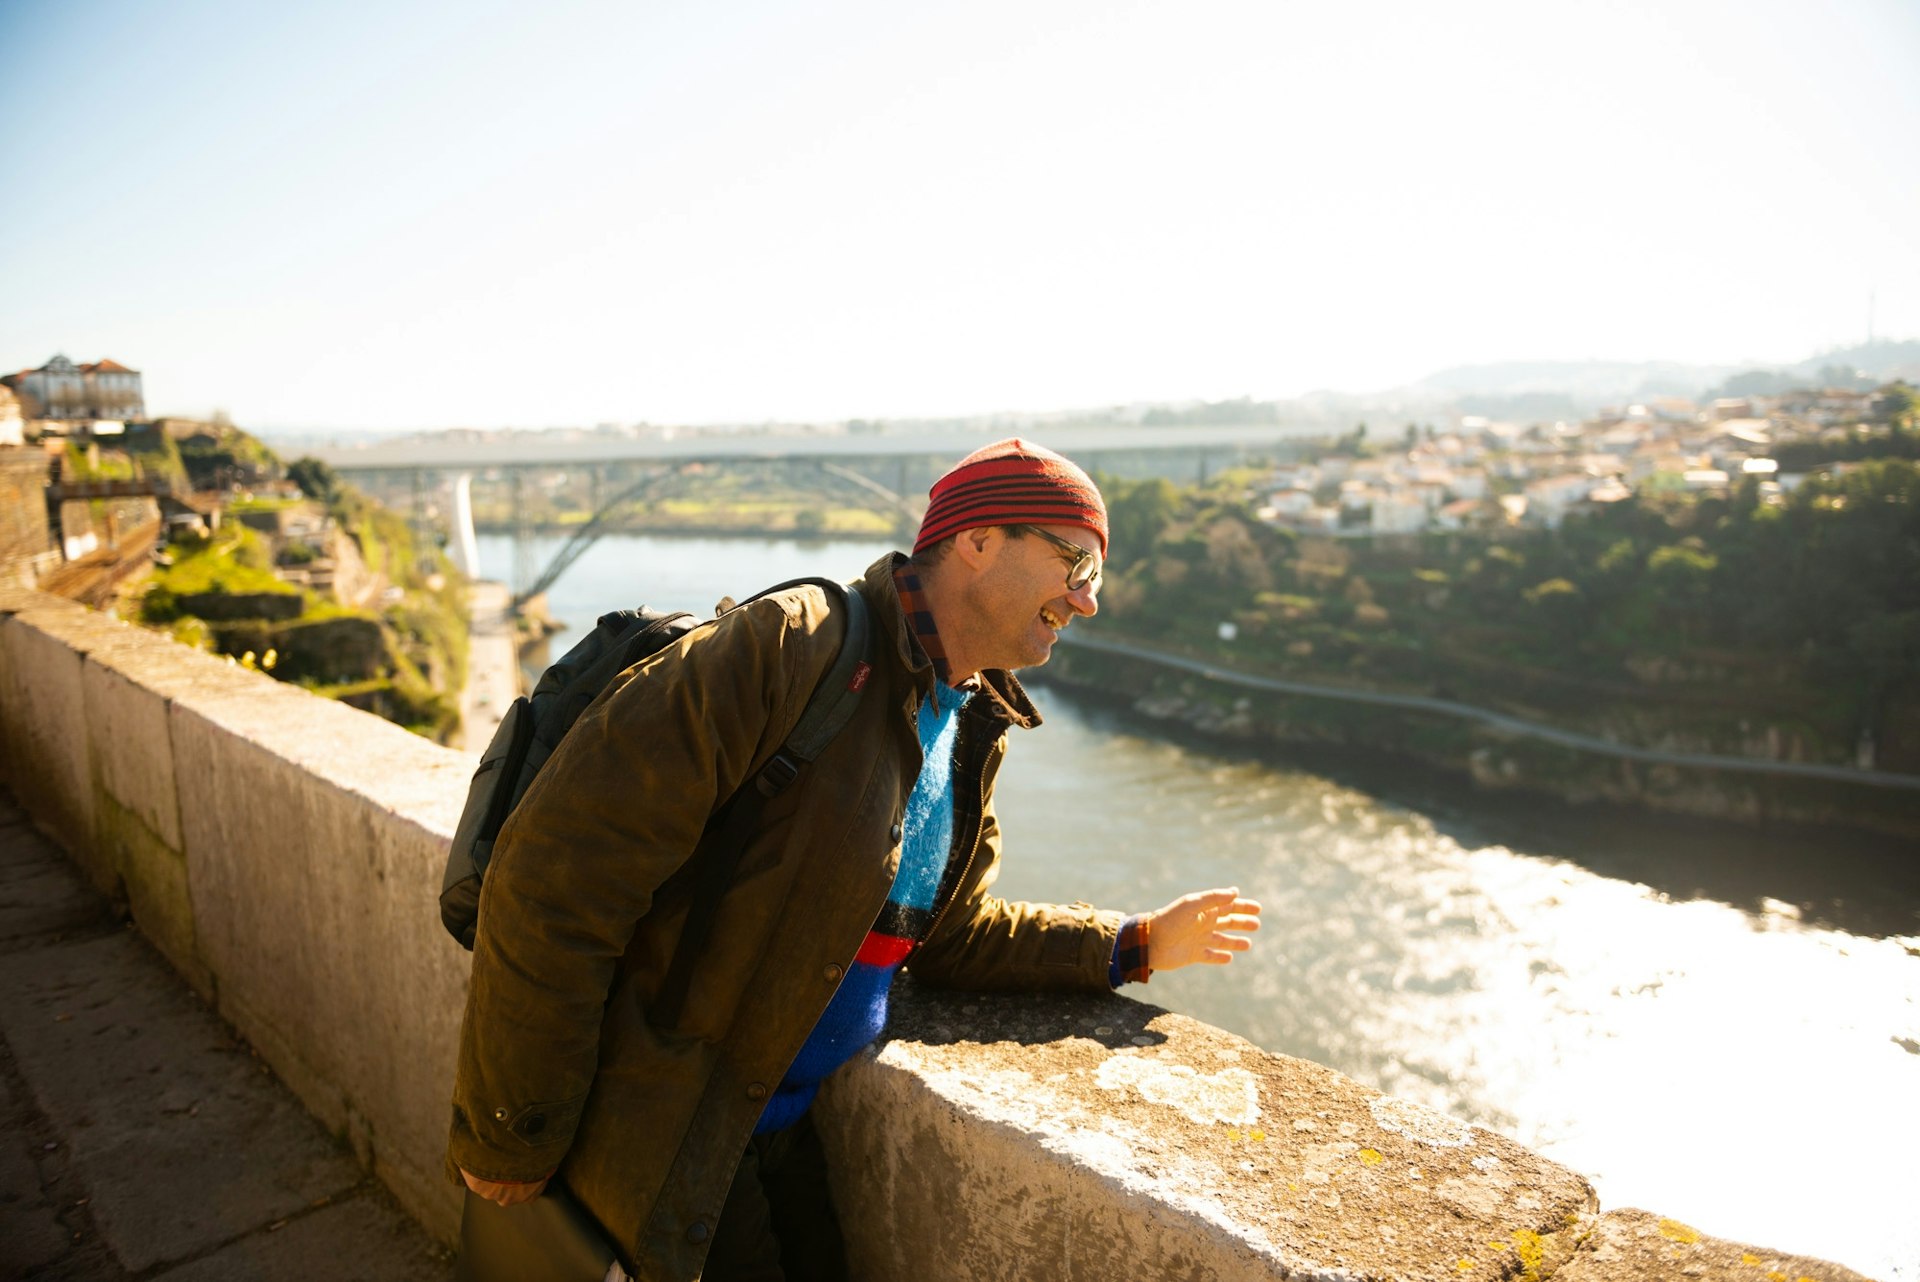 Pedro, the host of the walking tour, on a bridge overlooking the Douro